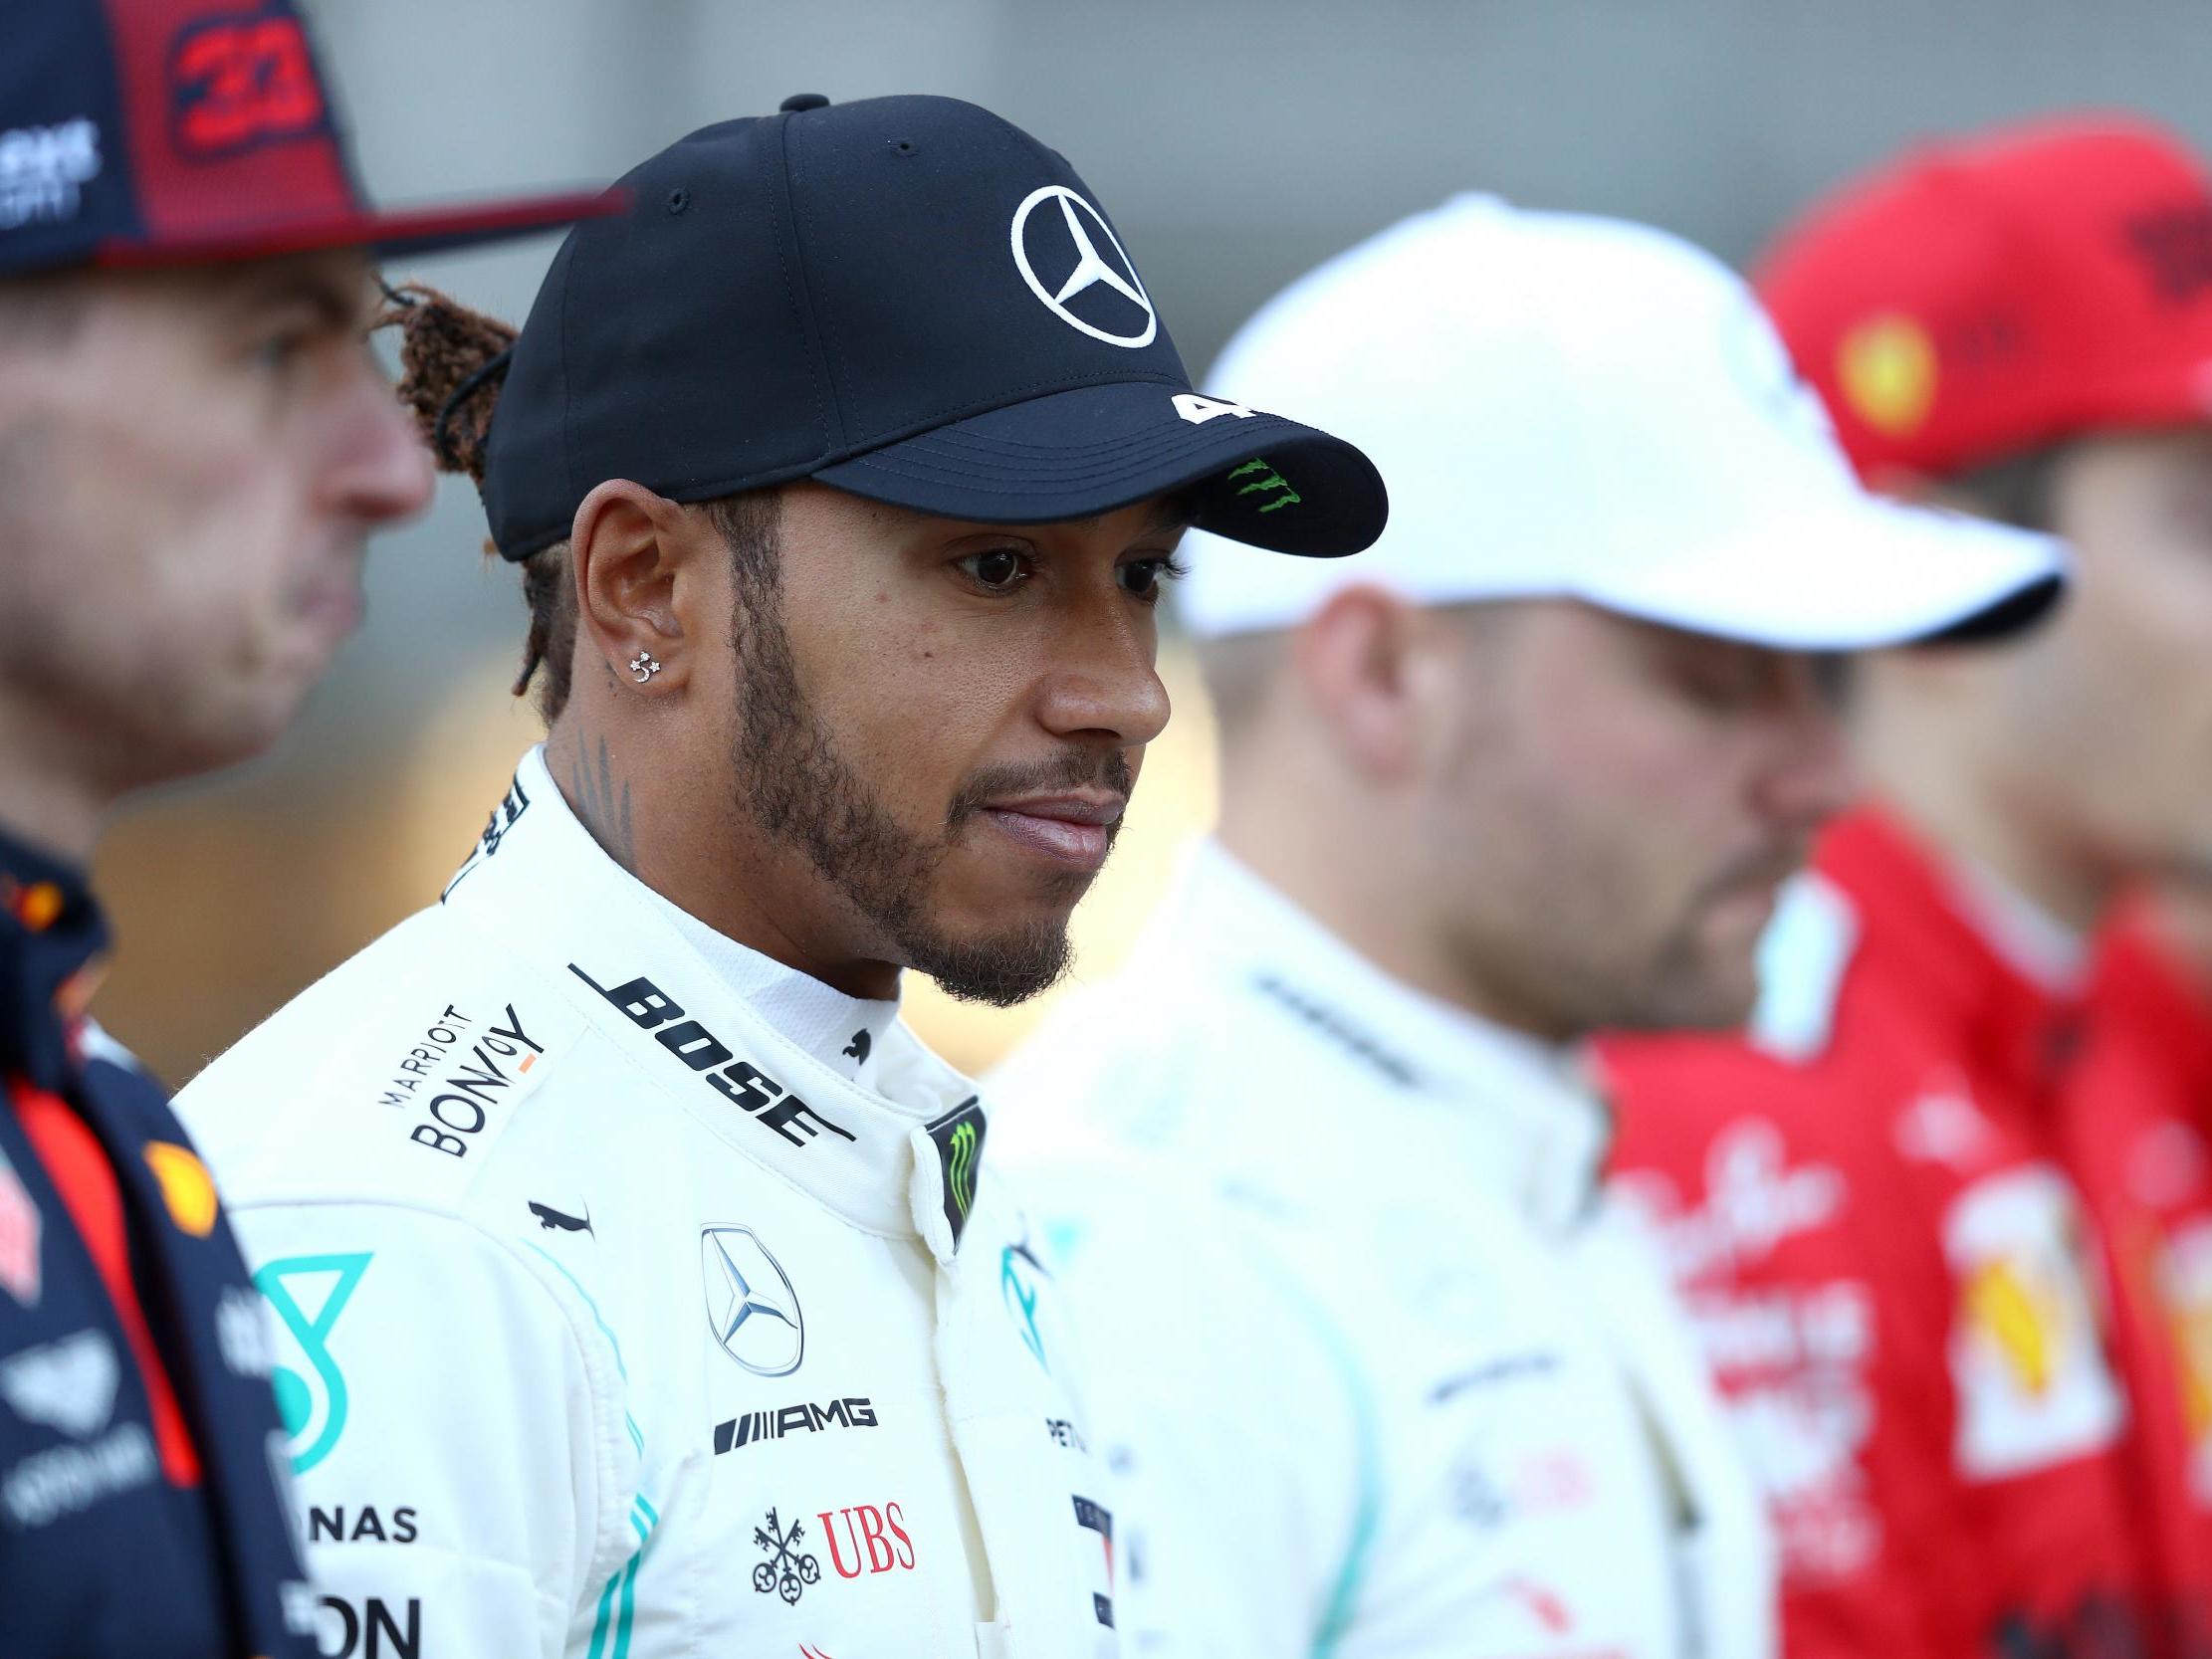 F1 live stream audience plummets to just 70,000 viewers per race after switch to Sky Sports The Independent The Independent